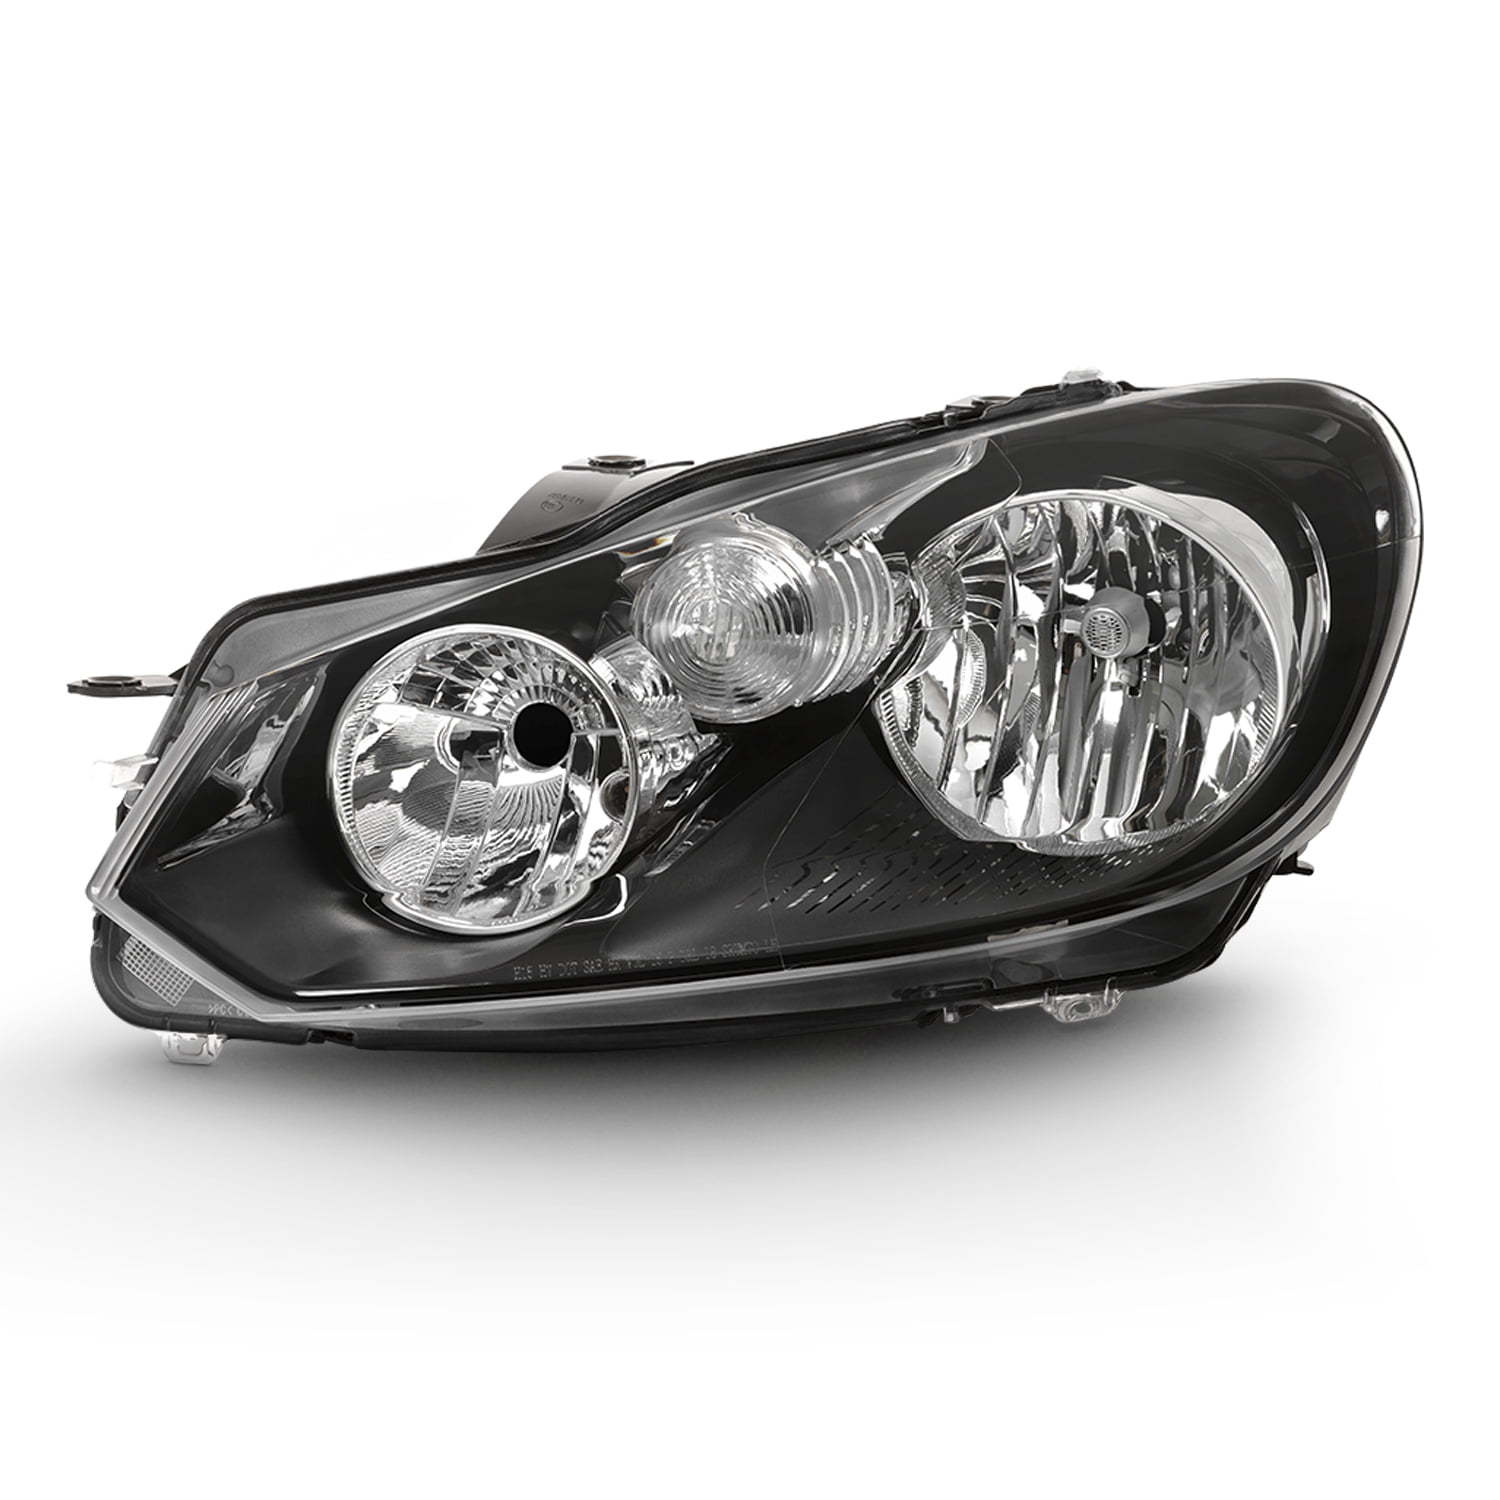 VOLKSWAGEN VENTO CAR HEADLIGHT ASSEMBLY - SET of 2 (Right and Left), A –  autoglam